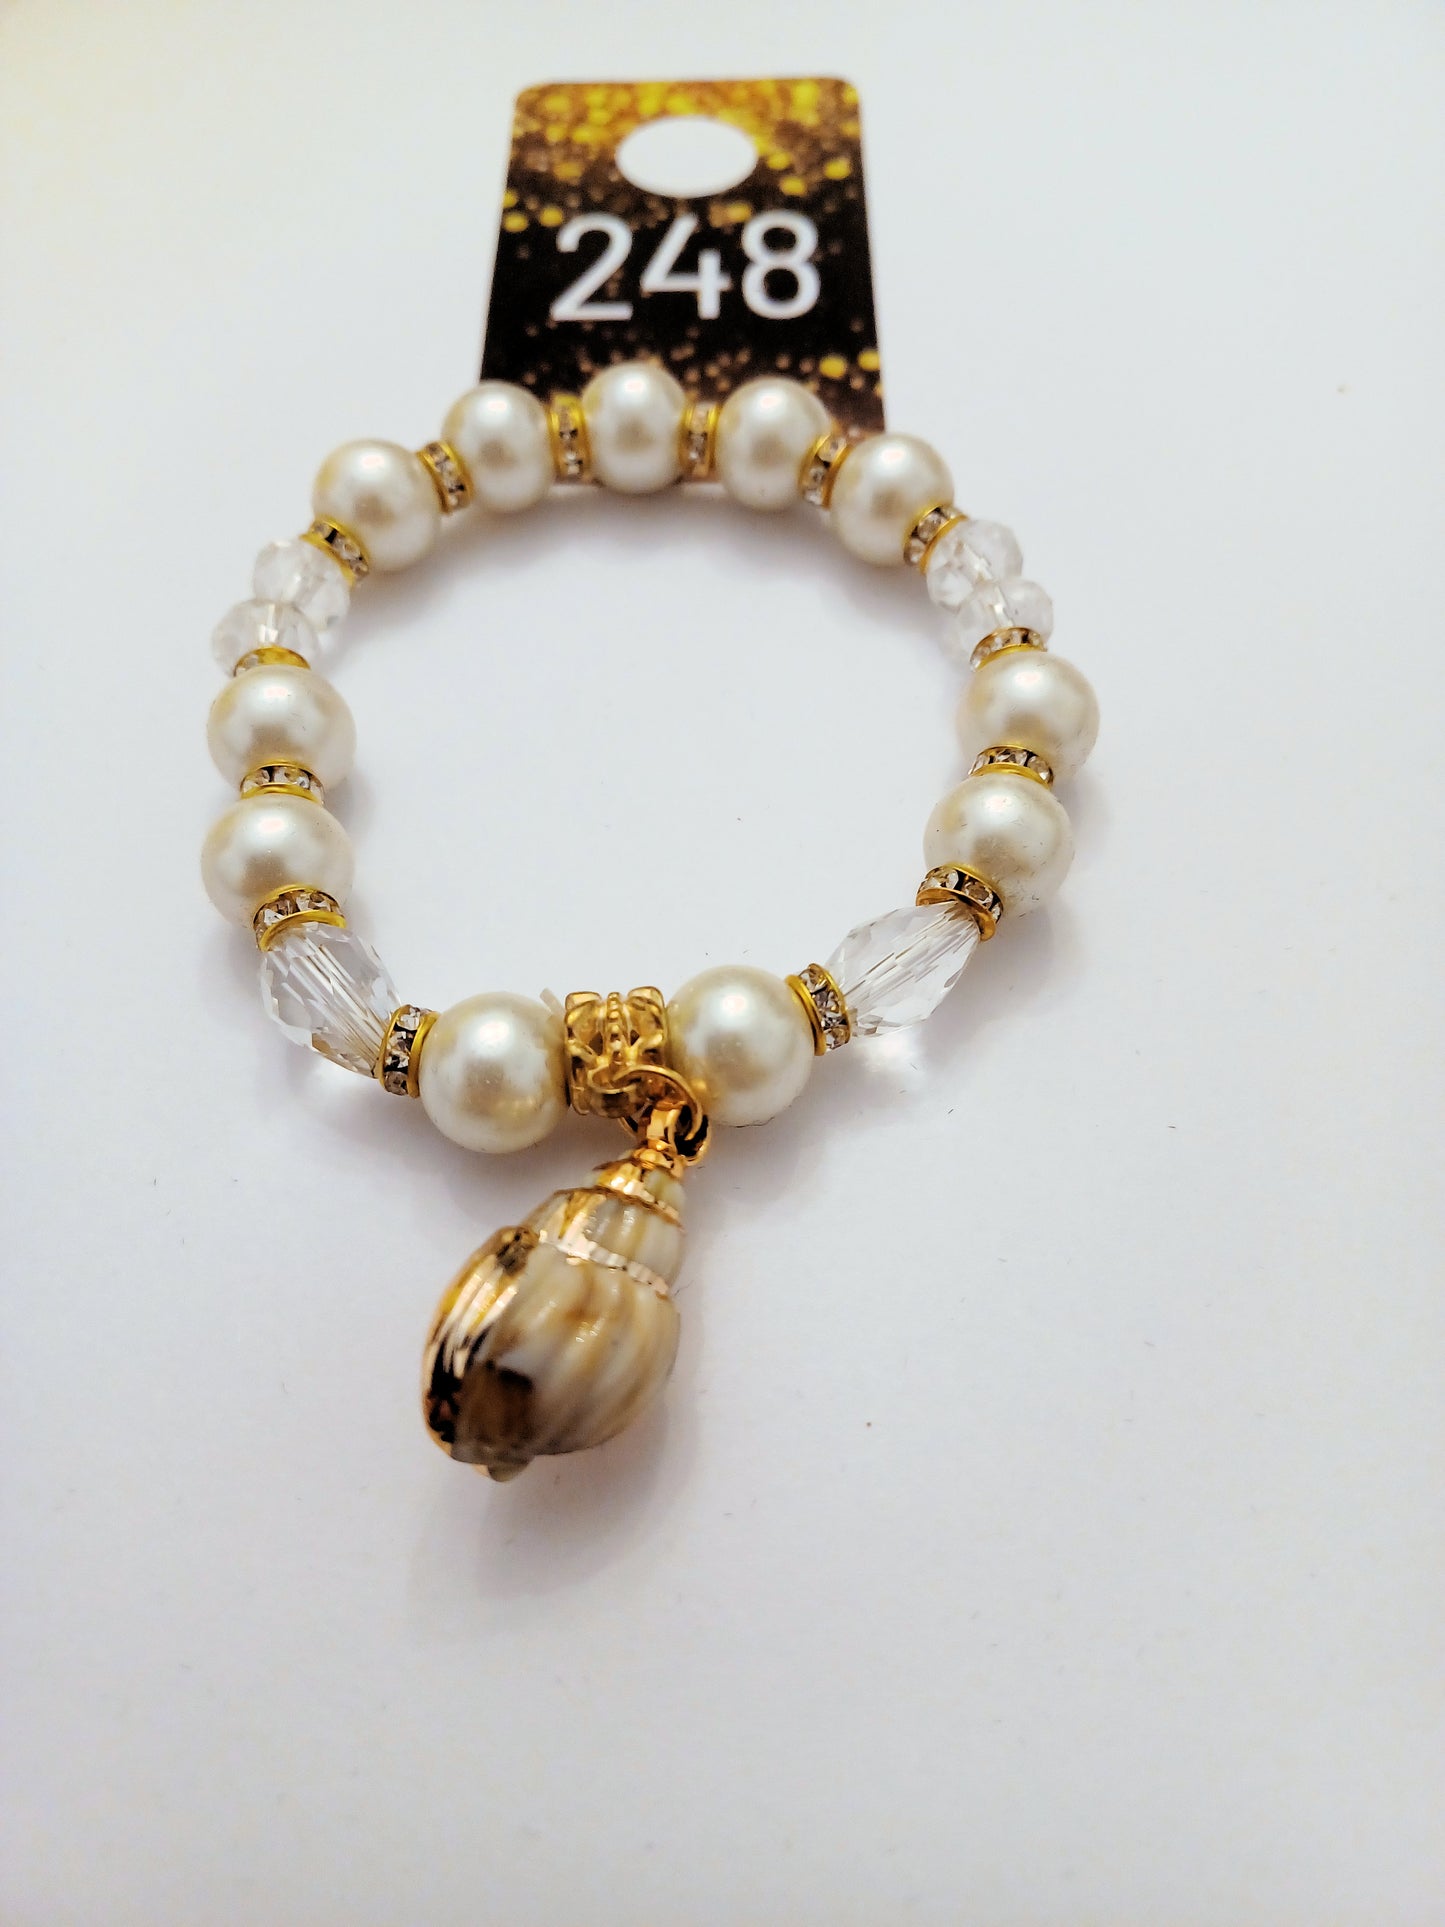 Clear Stones and Pearls with Rhinestone Spacers Shell Bracelet